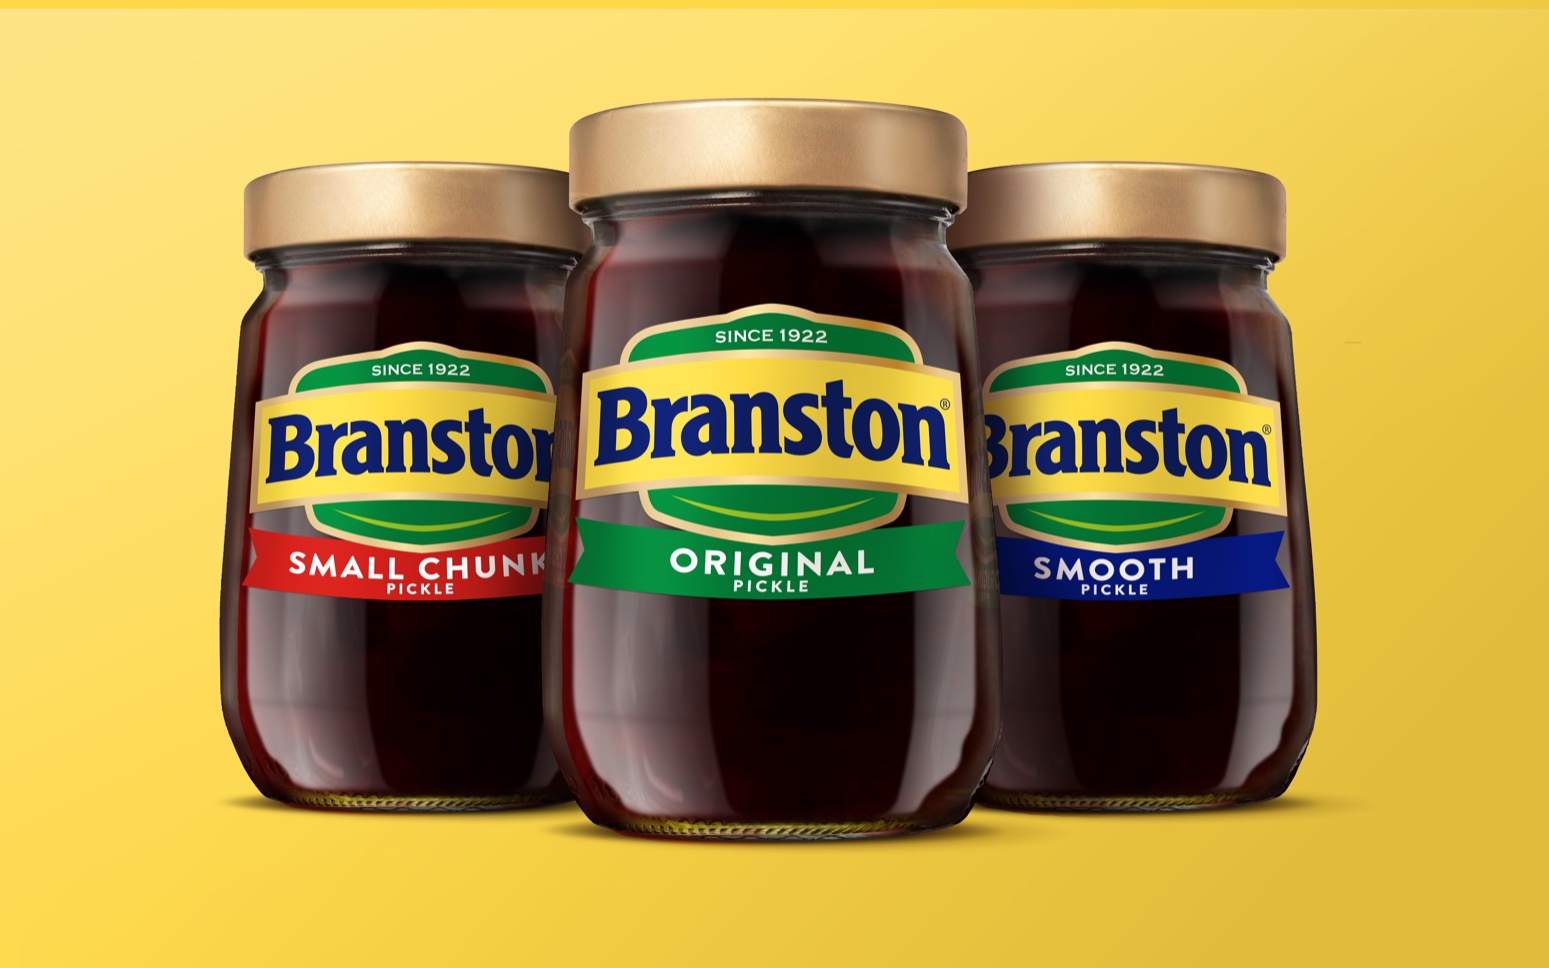 Branston Launches Packaging Refresh To Celebrate Its 100-Year Anniversary